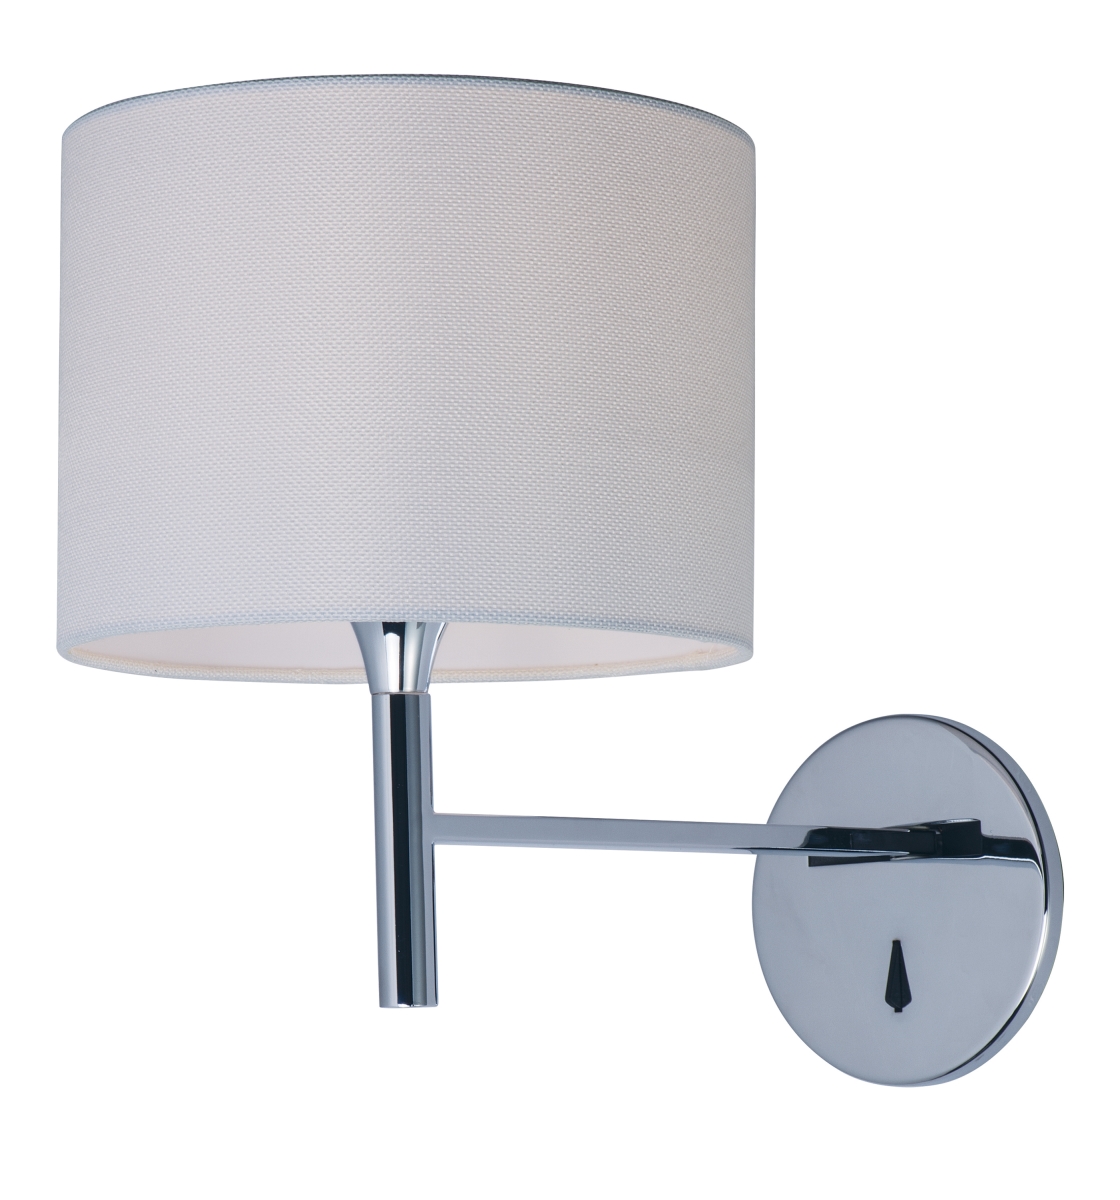 17.25 In. Hotel Led 1 Light Wall Sconce - Polished Chrome